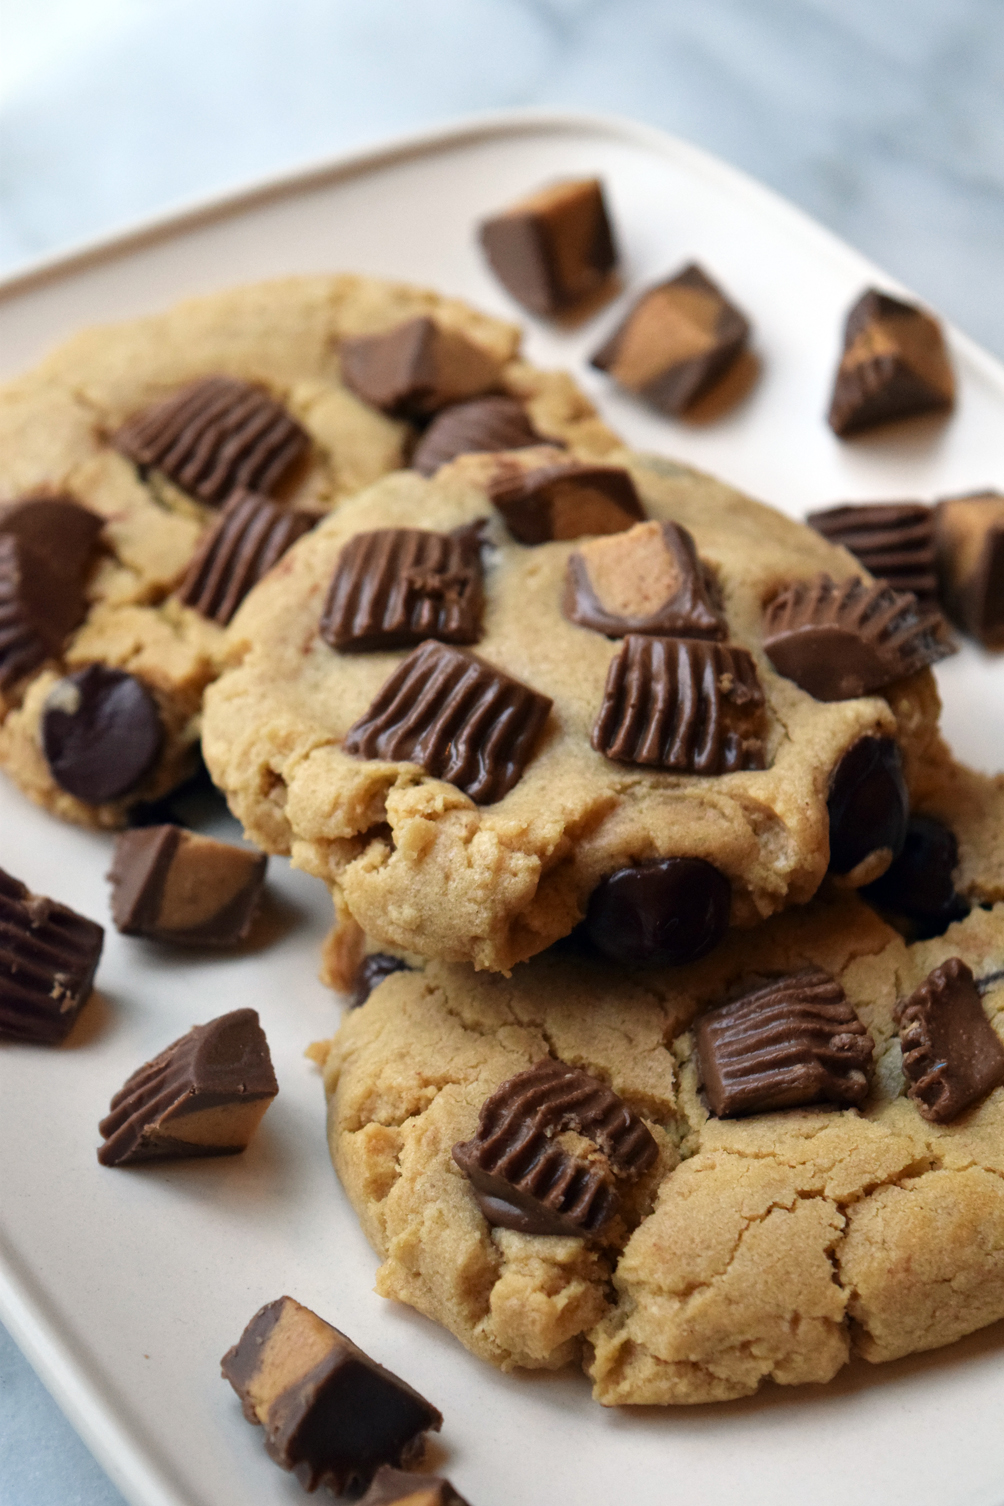 Reese's peanut butter cookies recipe